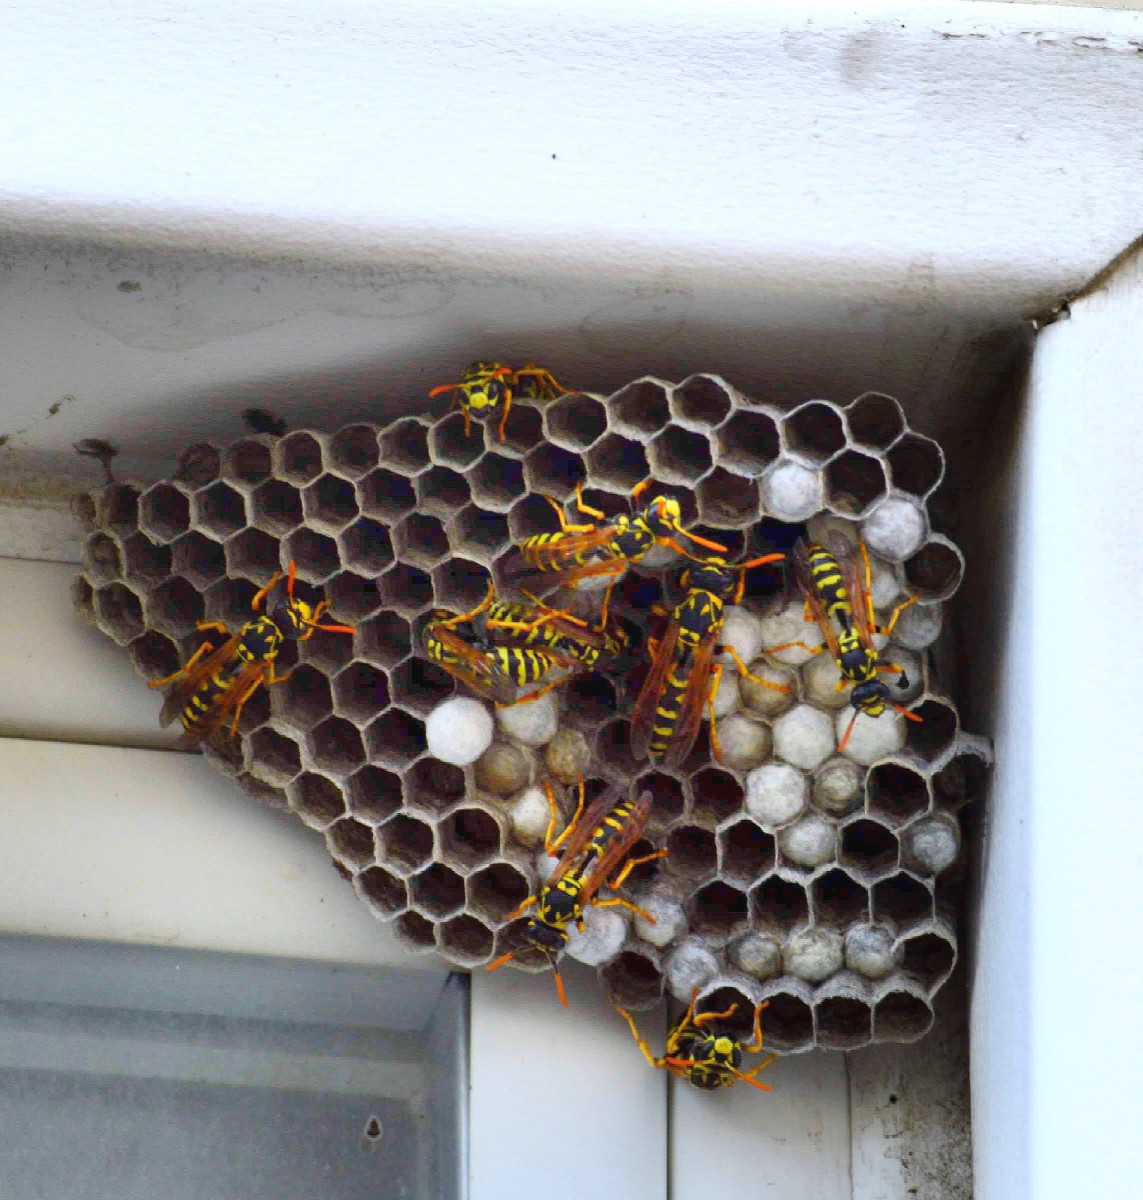 yellow jackets on their nest on top of the house